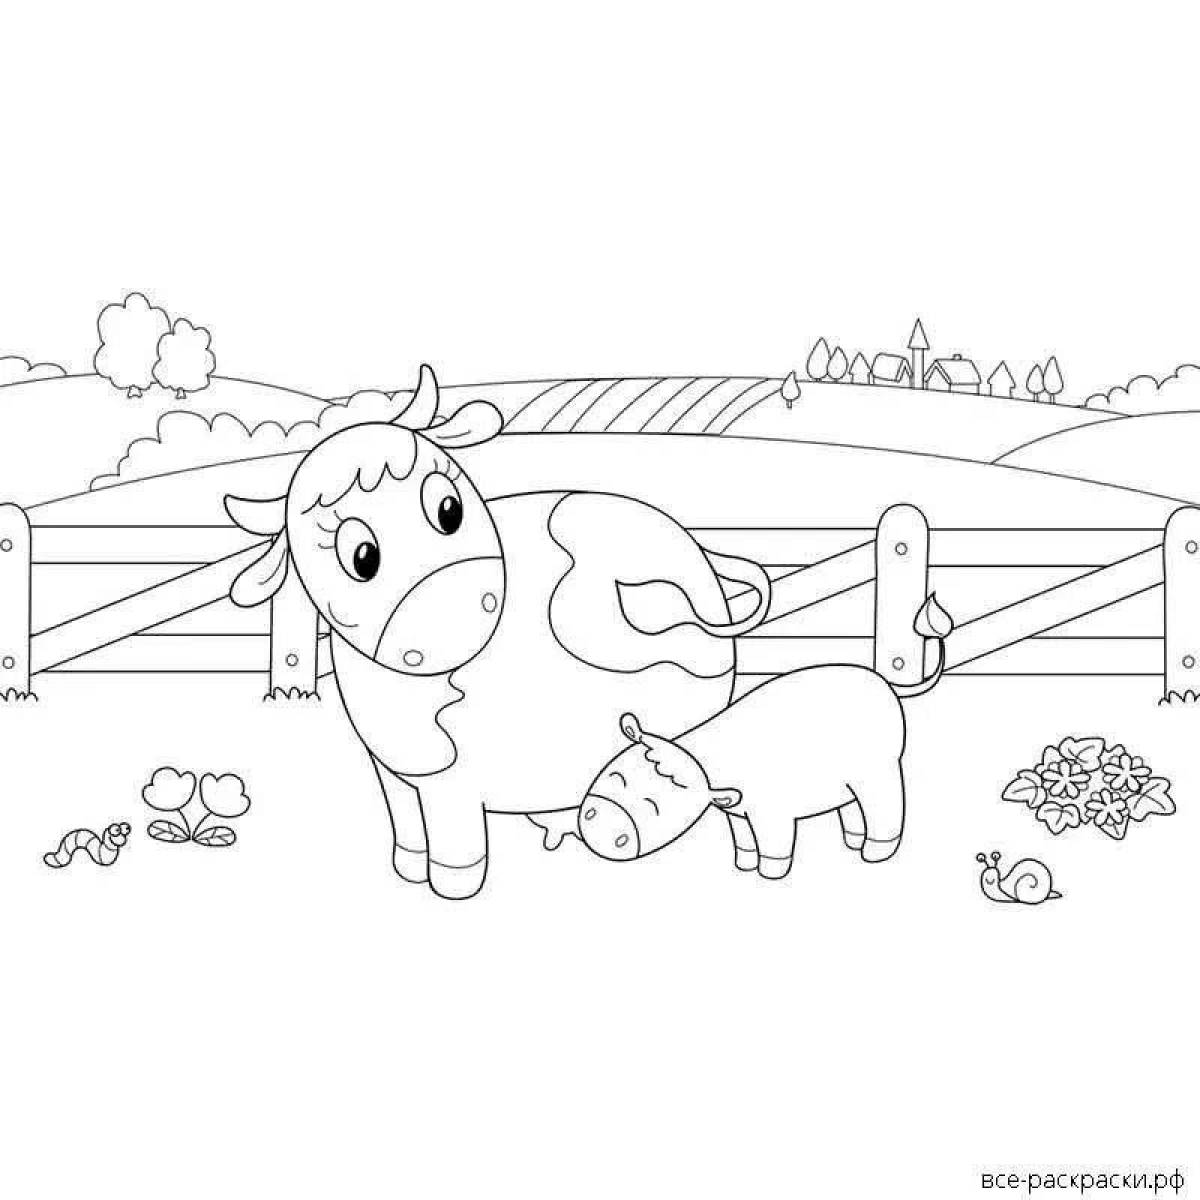 Sparkling bo and zo coloring page